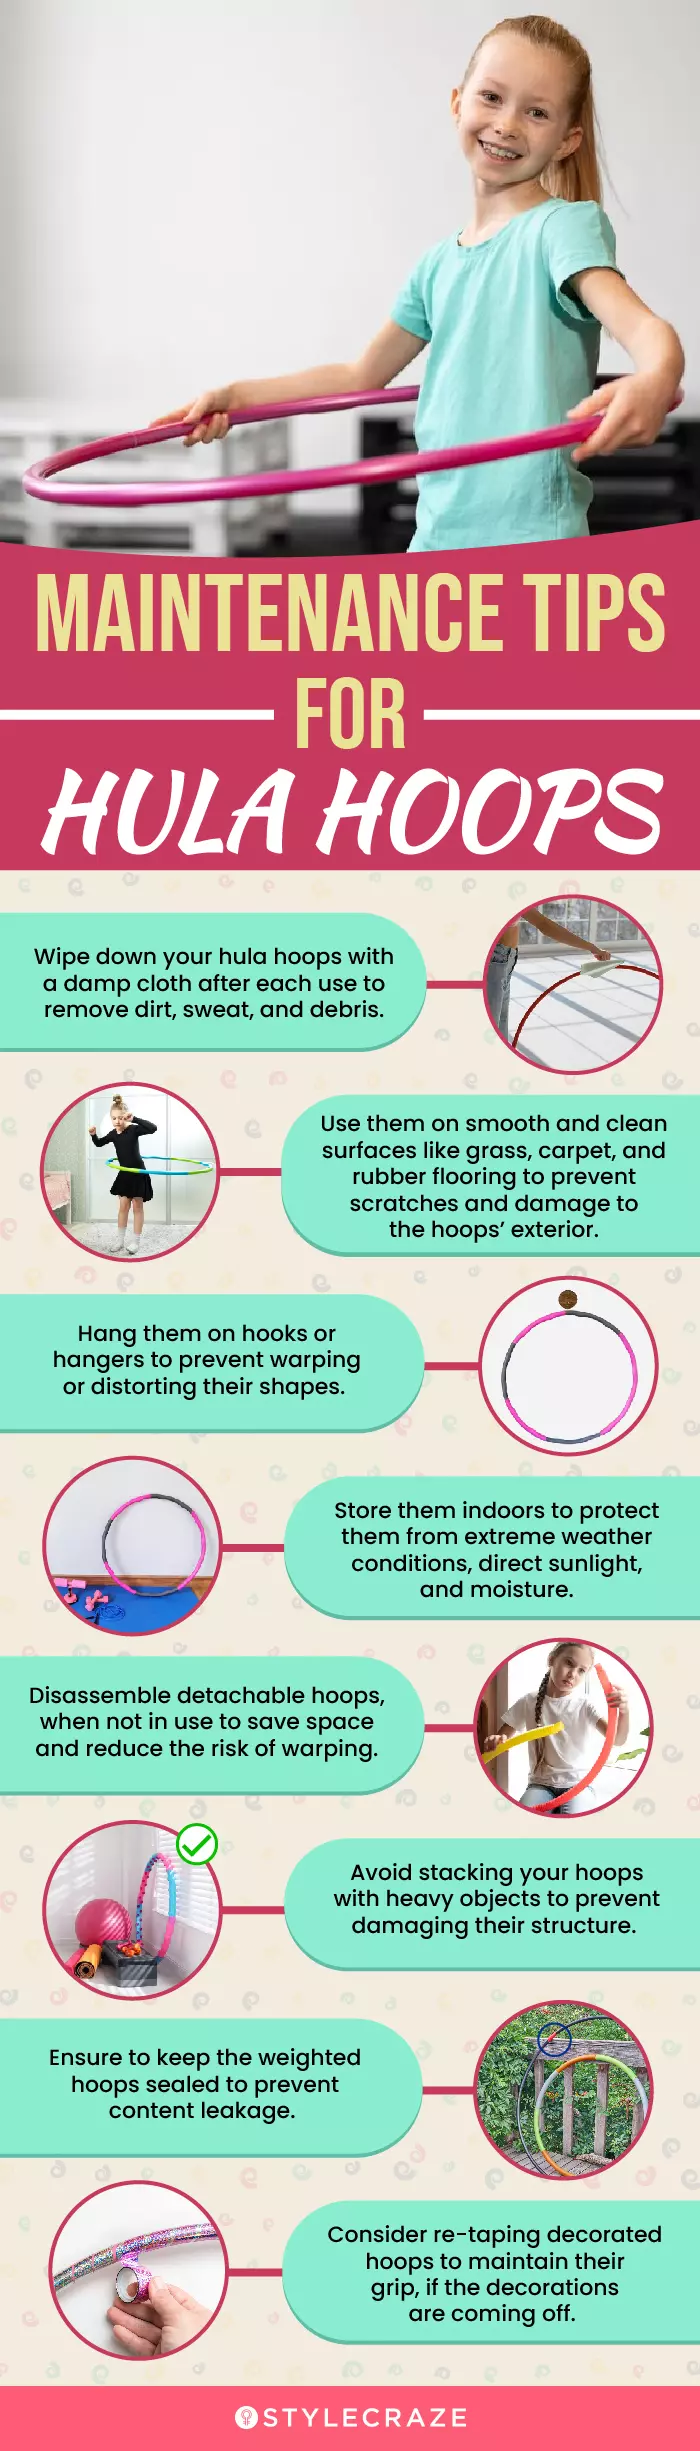 Hula Hoops: Care And Maintenance Tips (infographic)